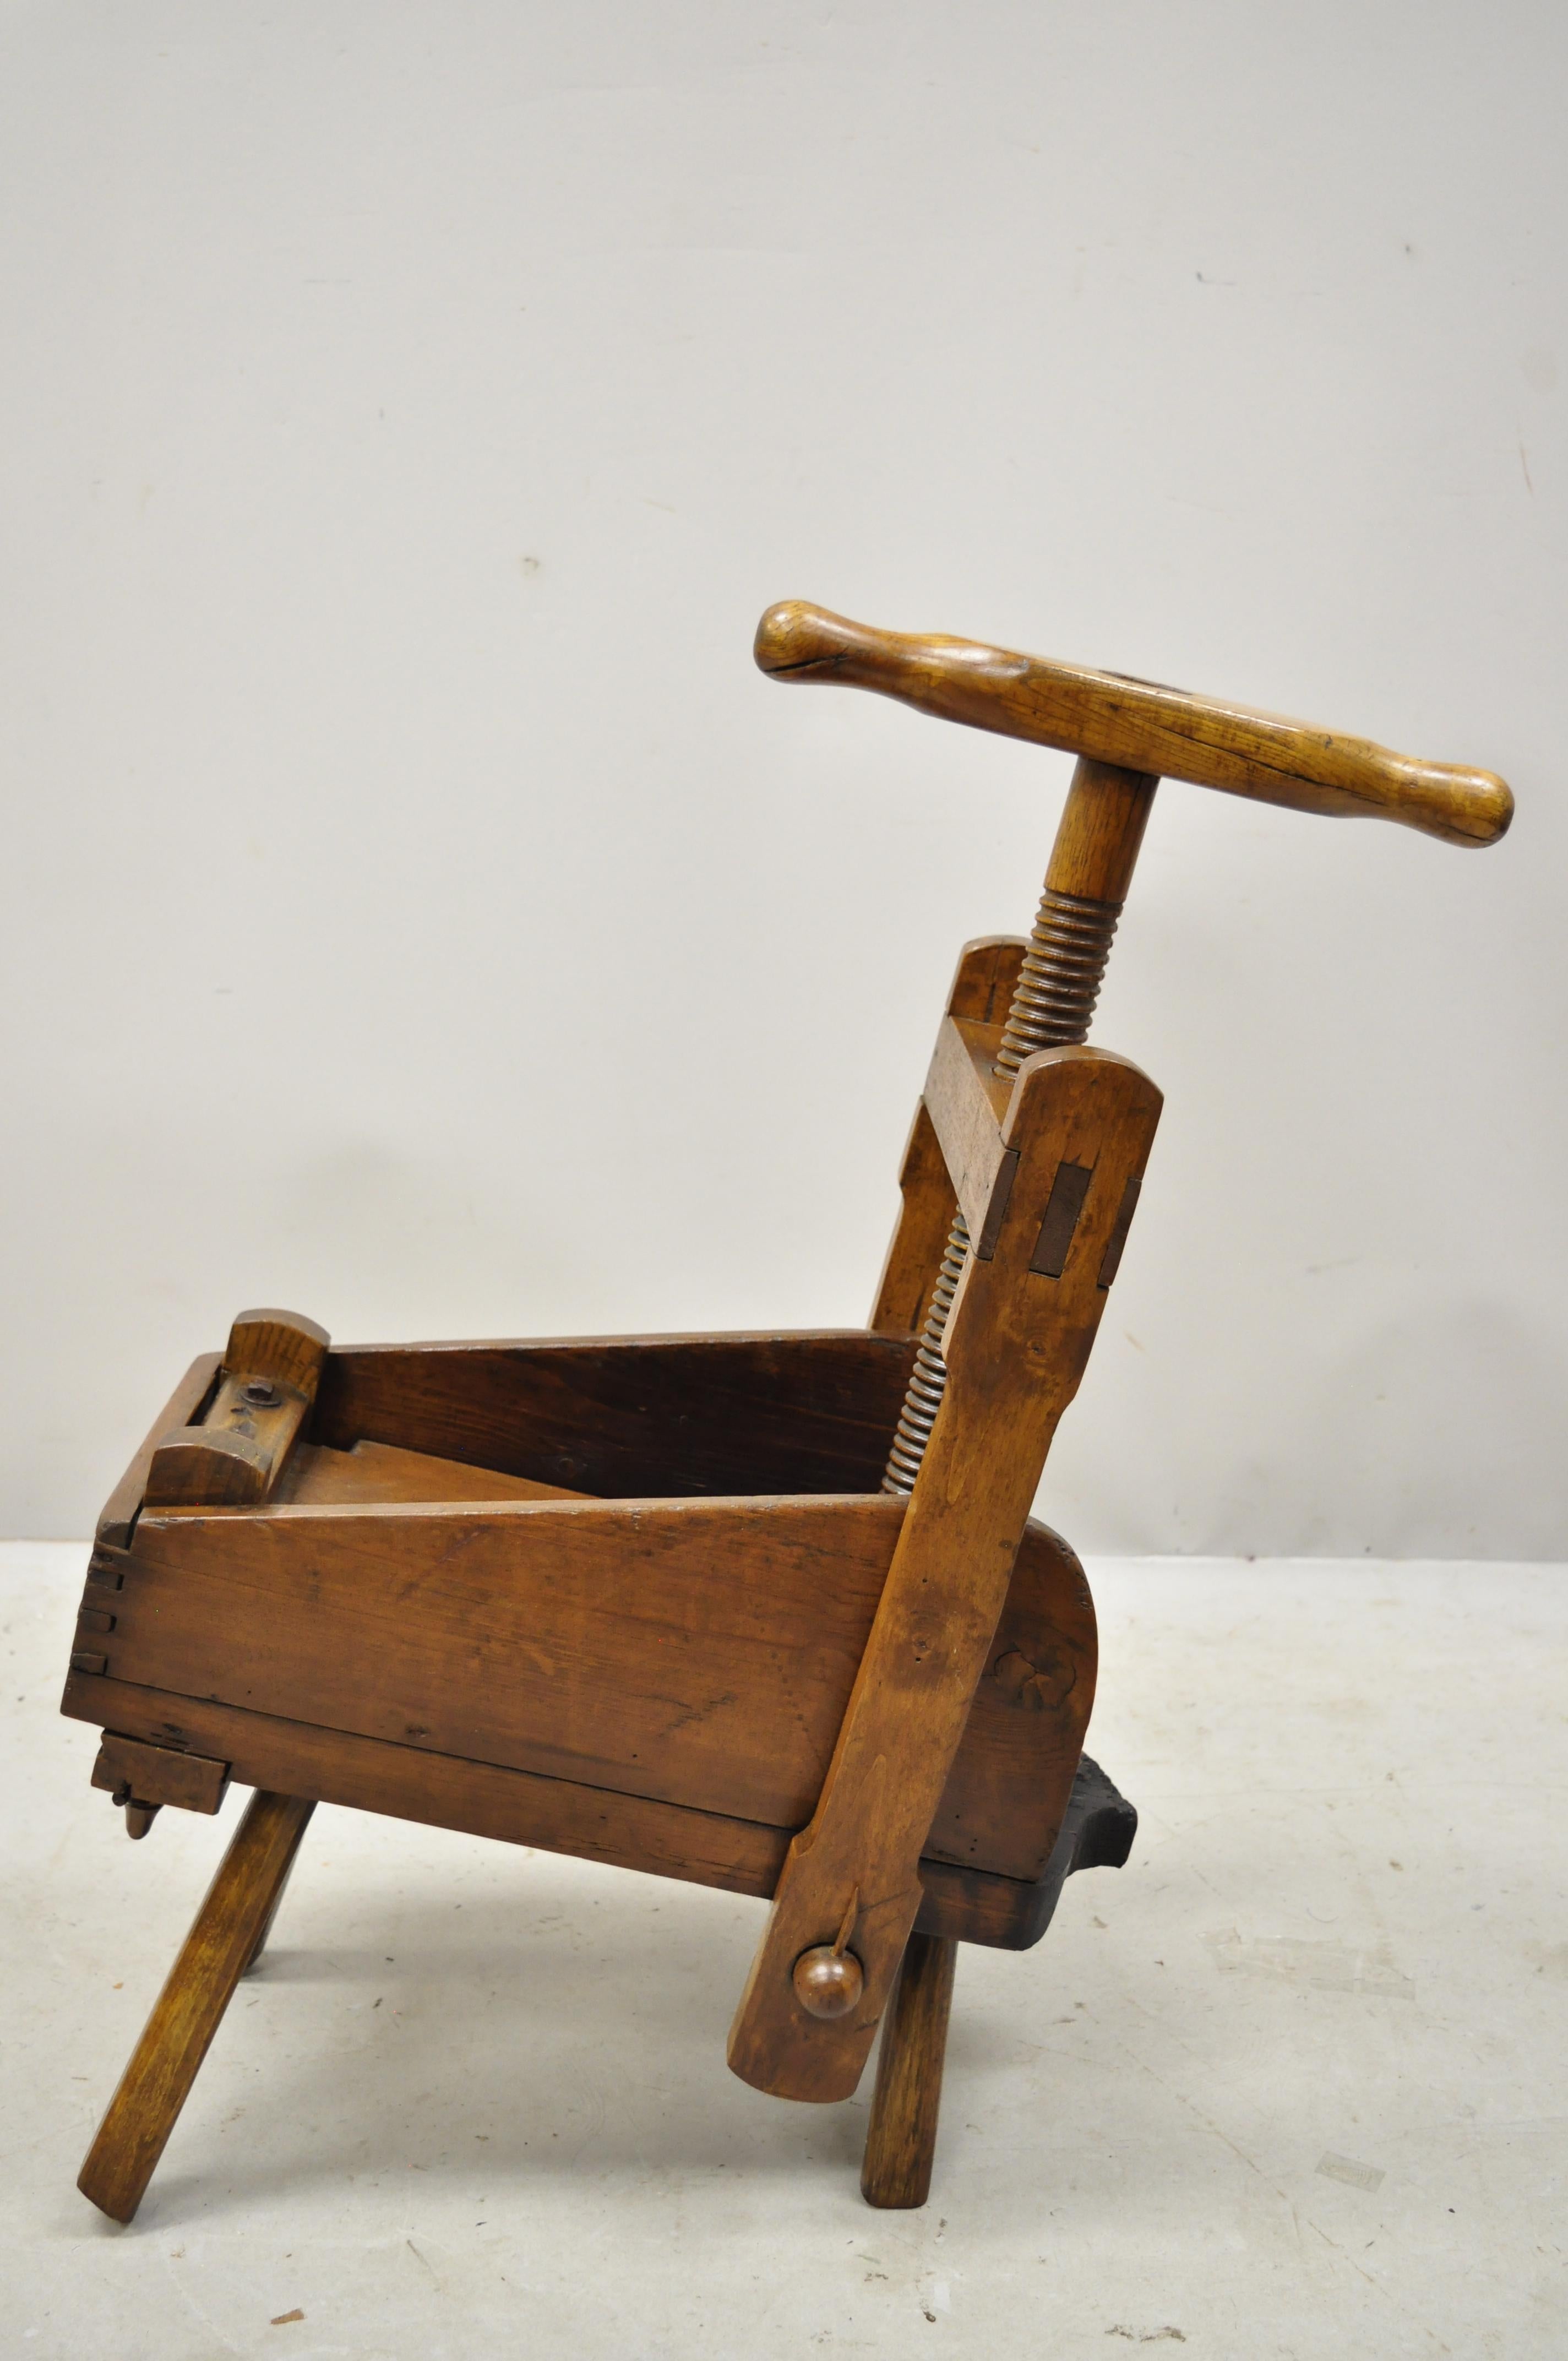 Antique 19th century handmade solid wood French wooden grape wine olive press, circa 19th century. Measurements: 27